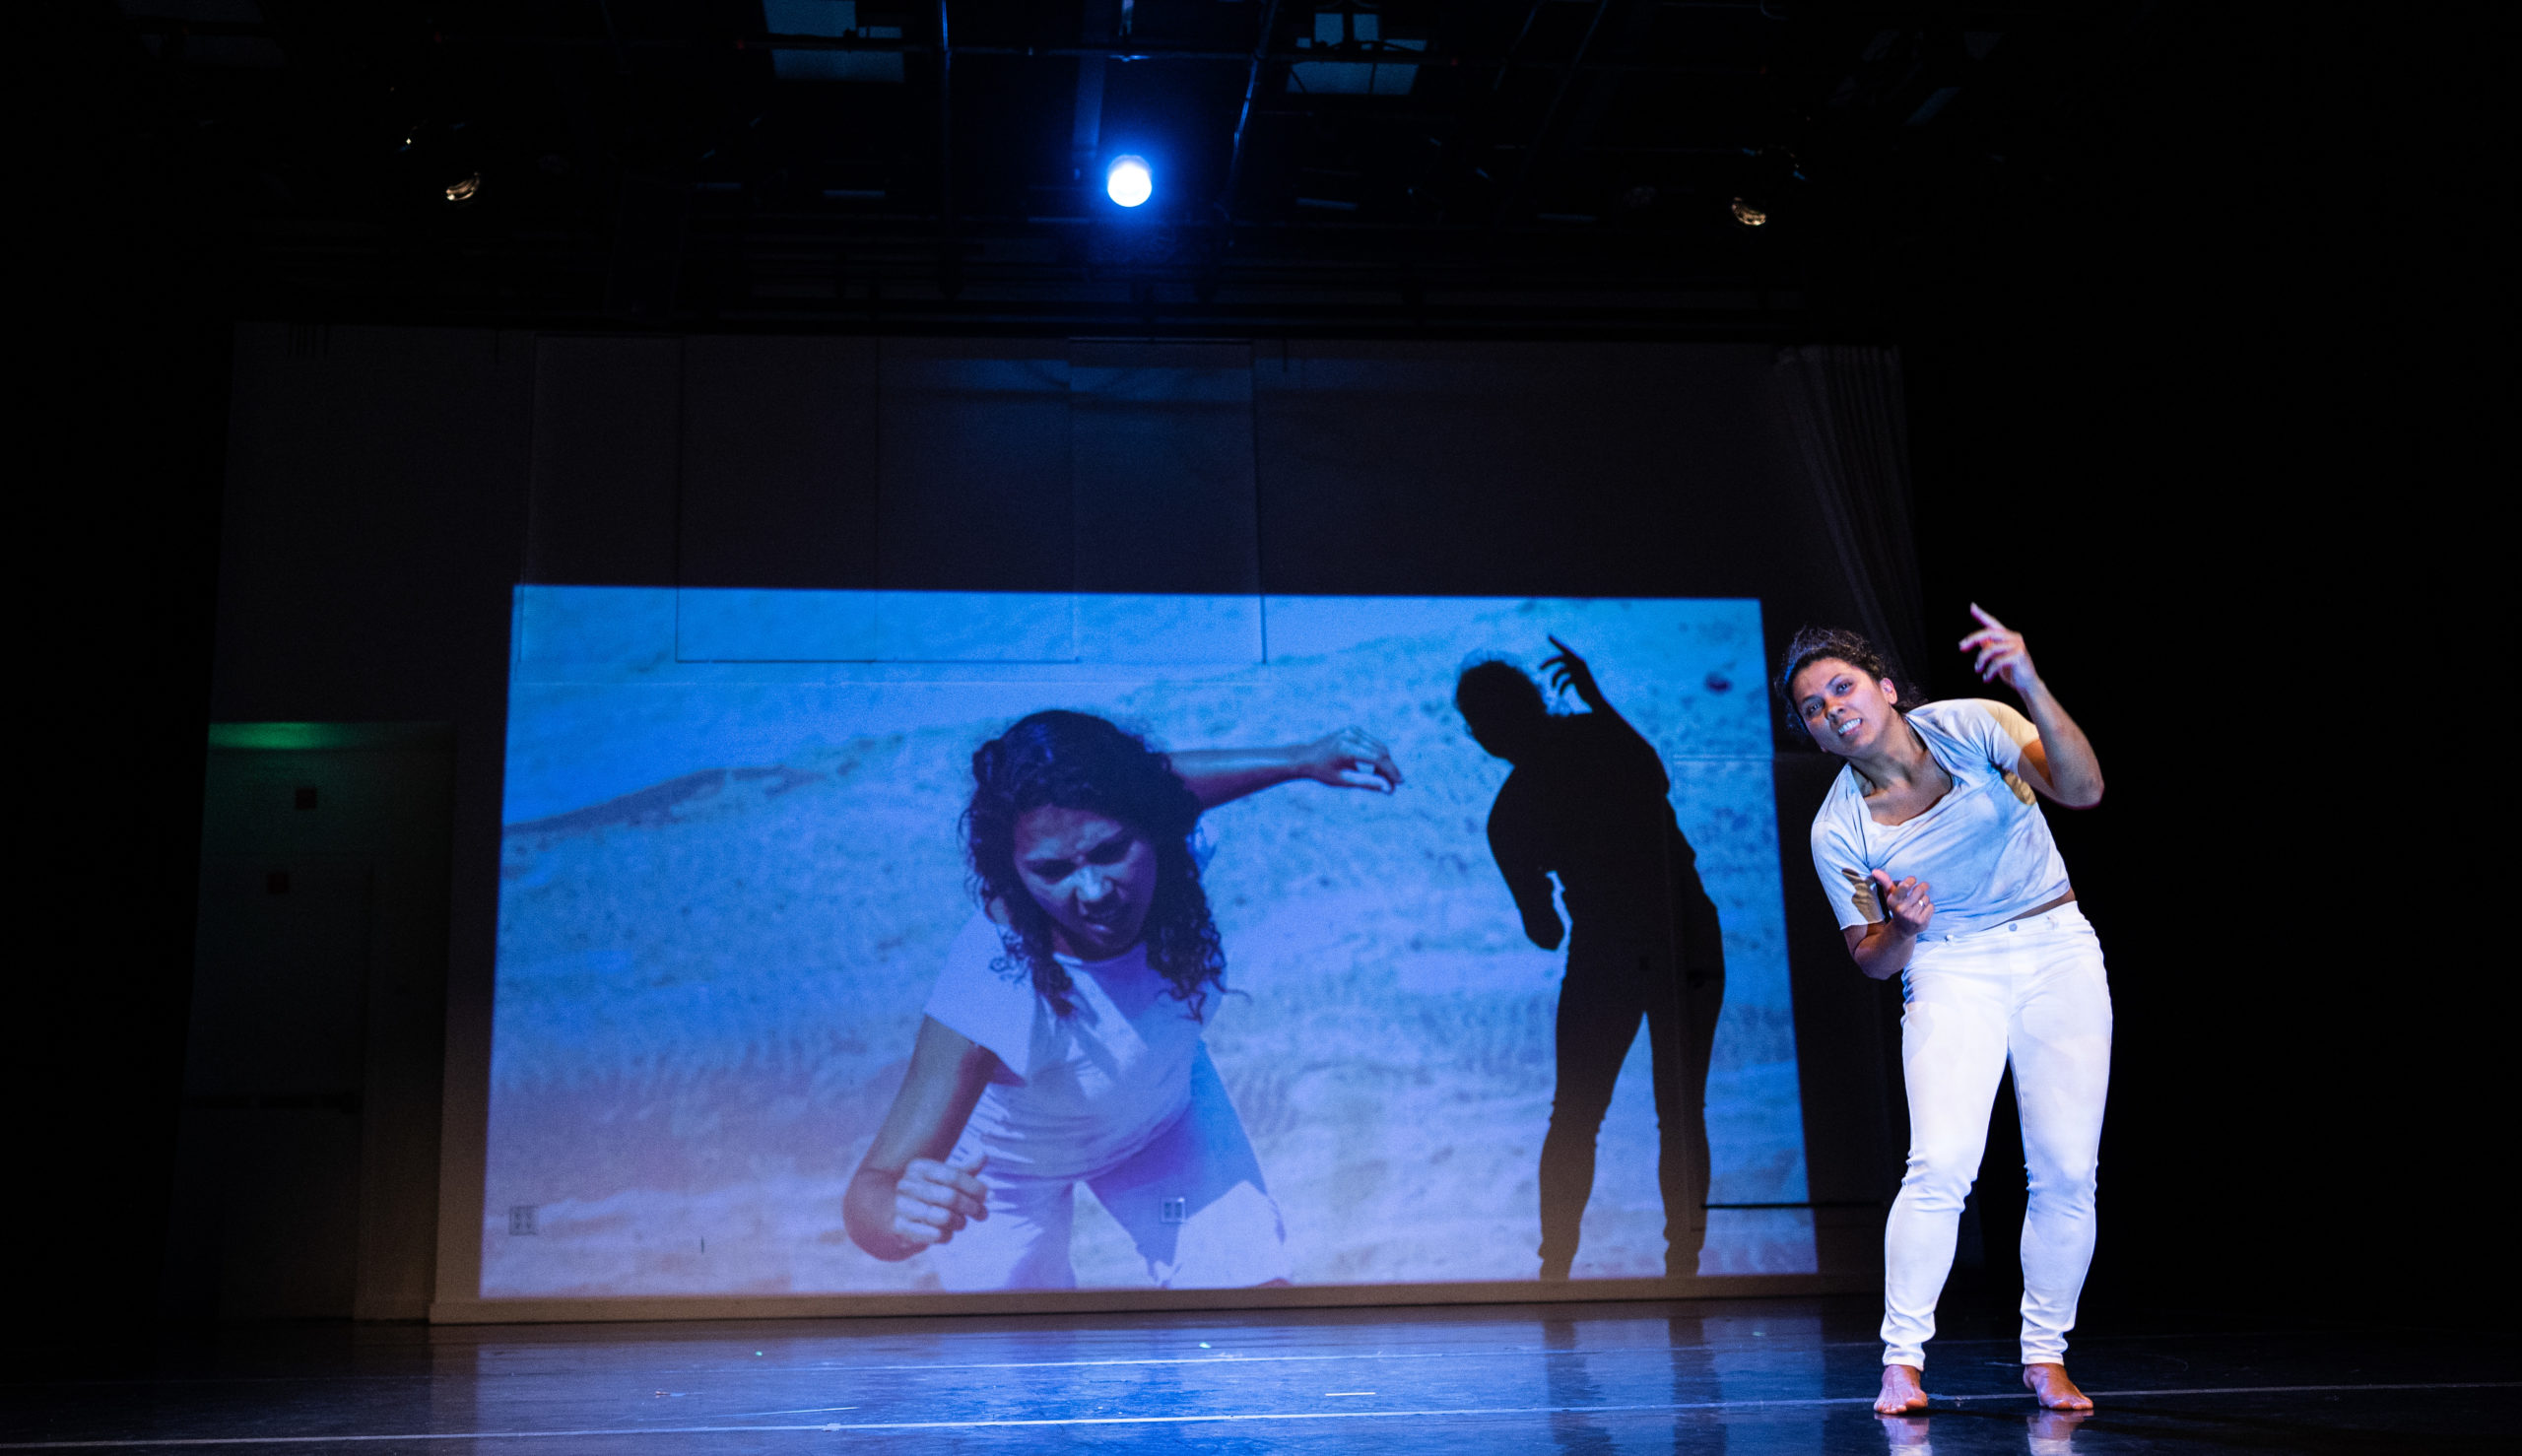 Dancer in front of a projection screen